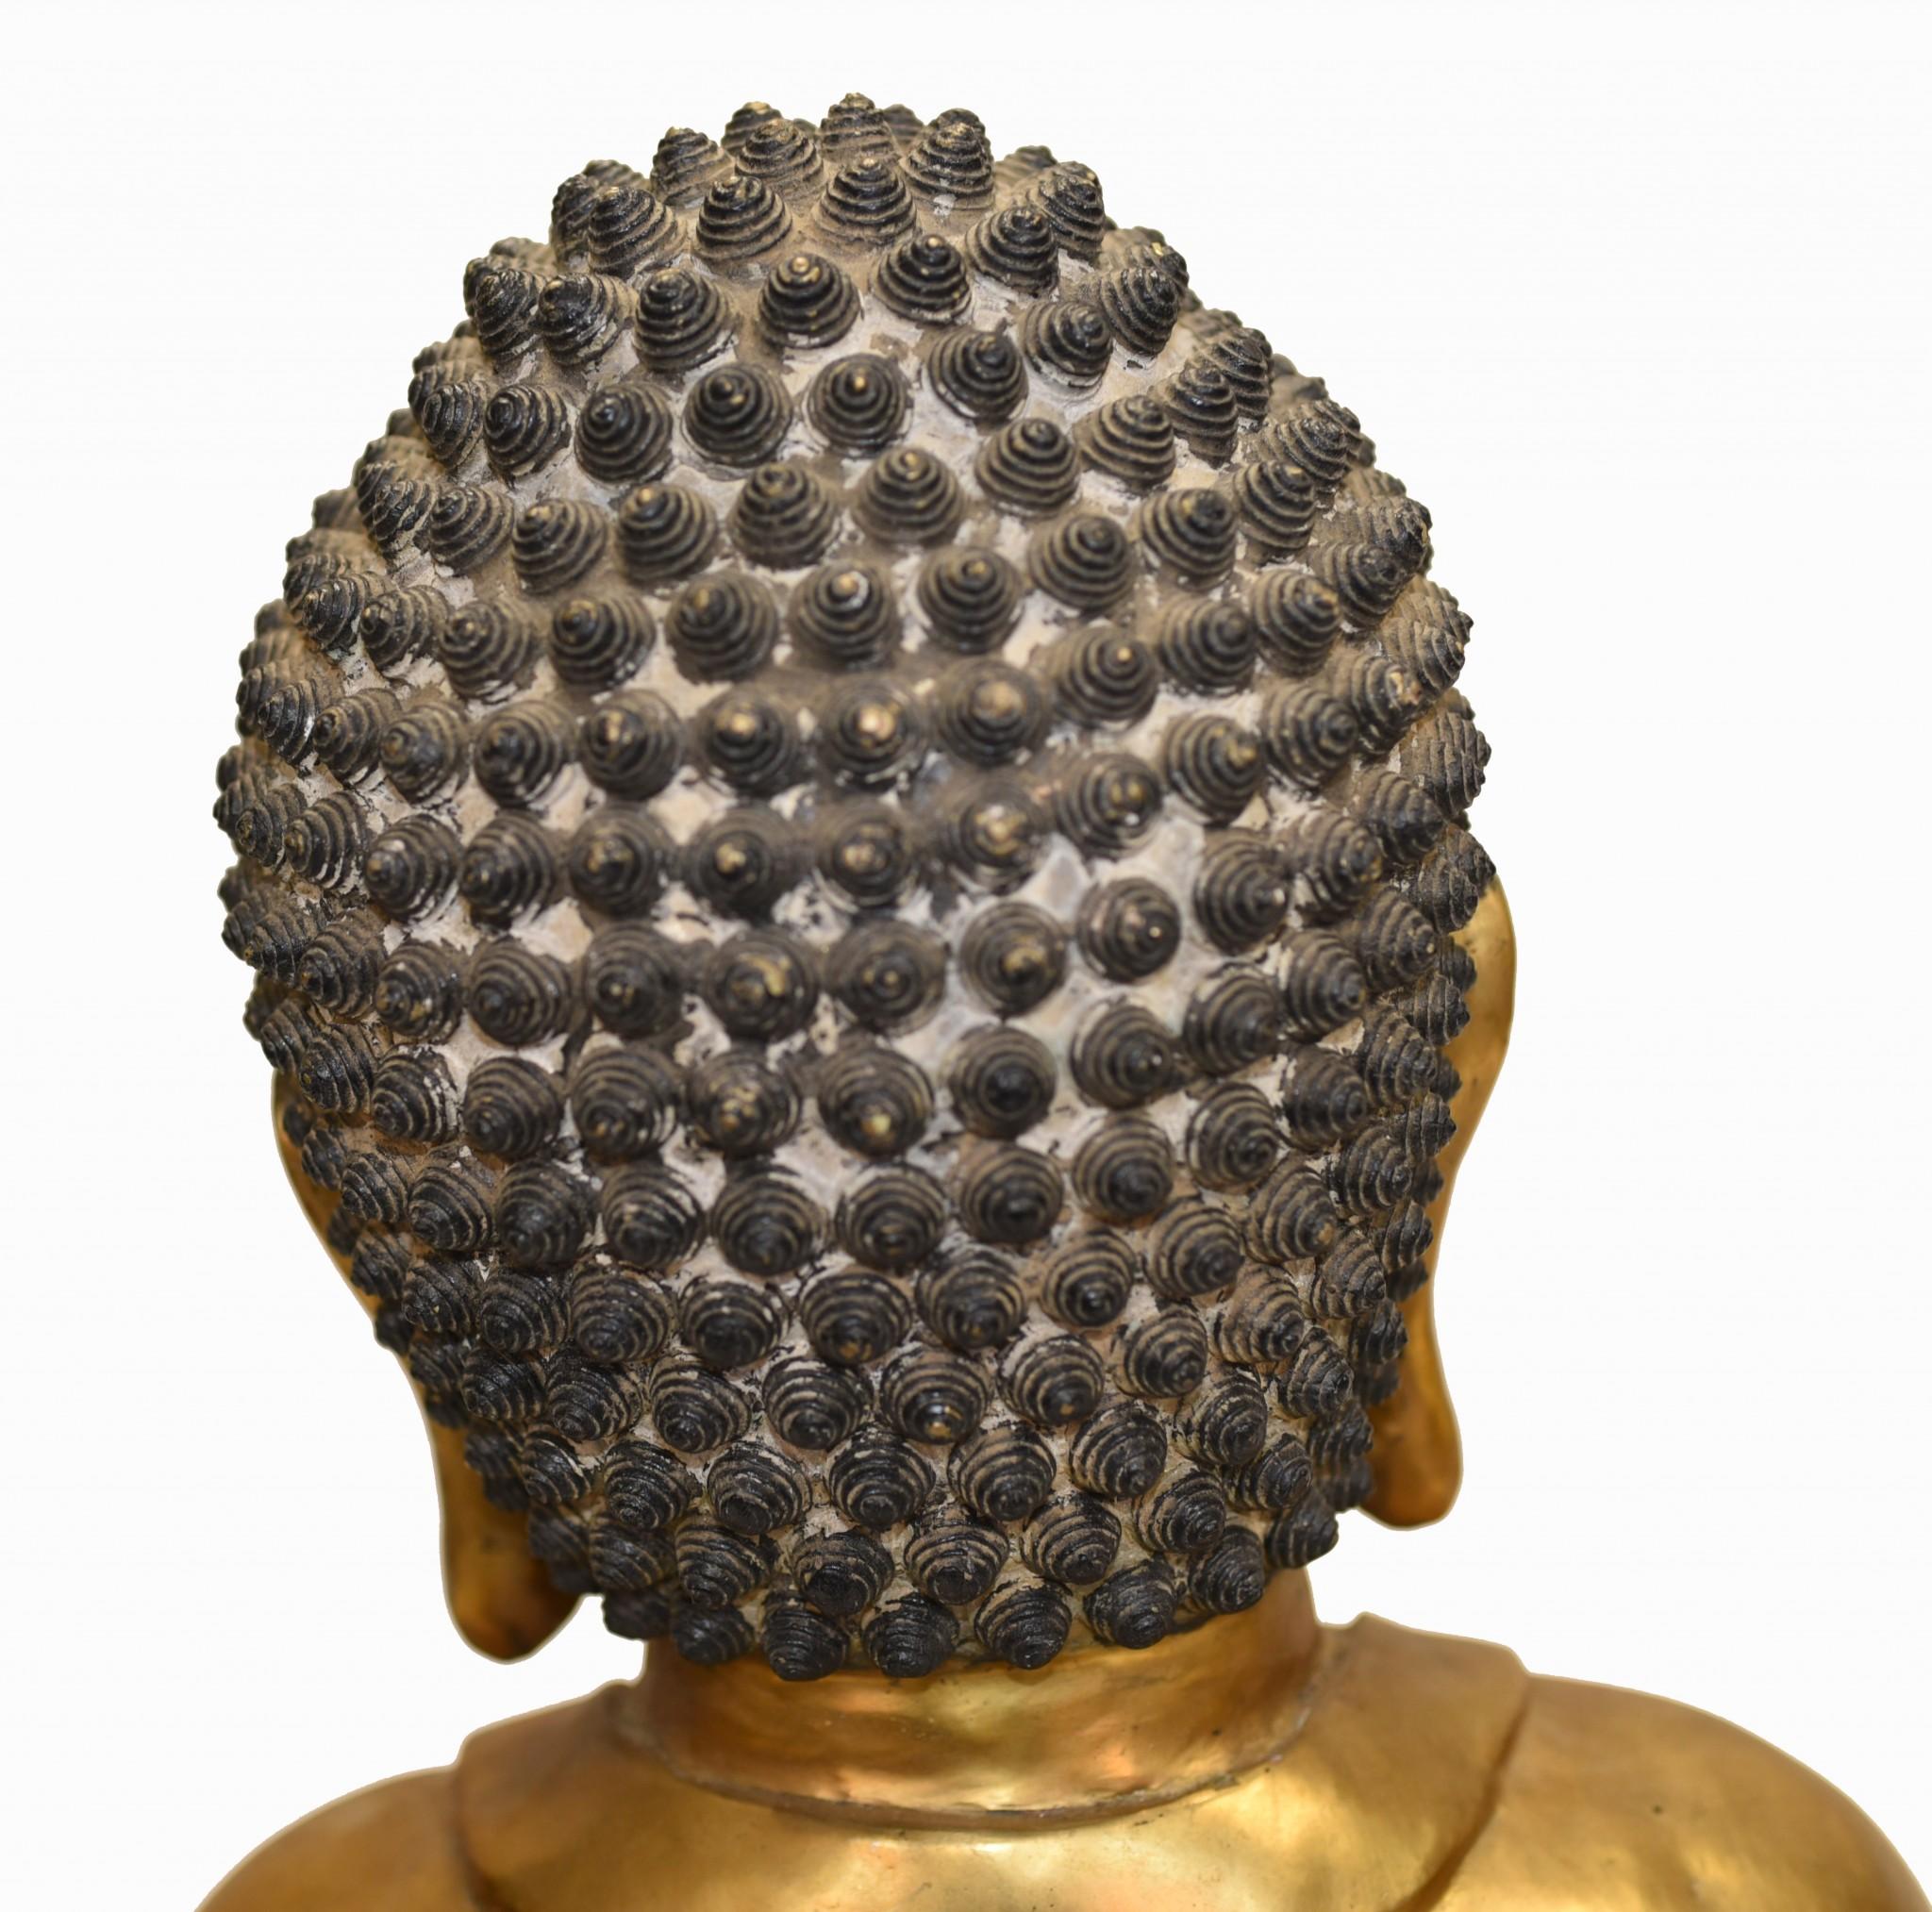 Burmese Bronze Buddha Statue Meditation Pose Buddhism Buddhist Art In Good Condition For Sale In Potters Bar, GB